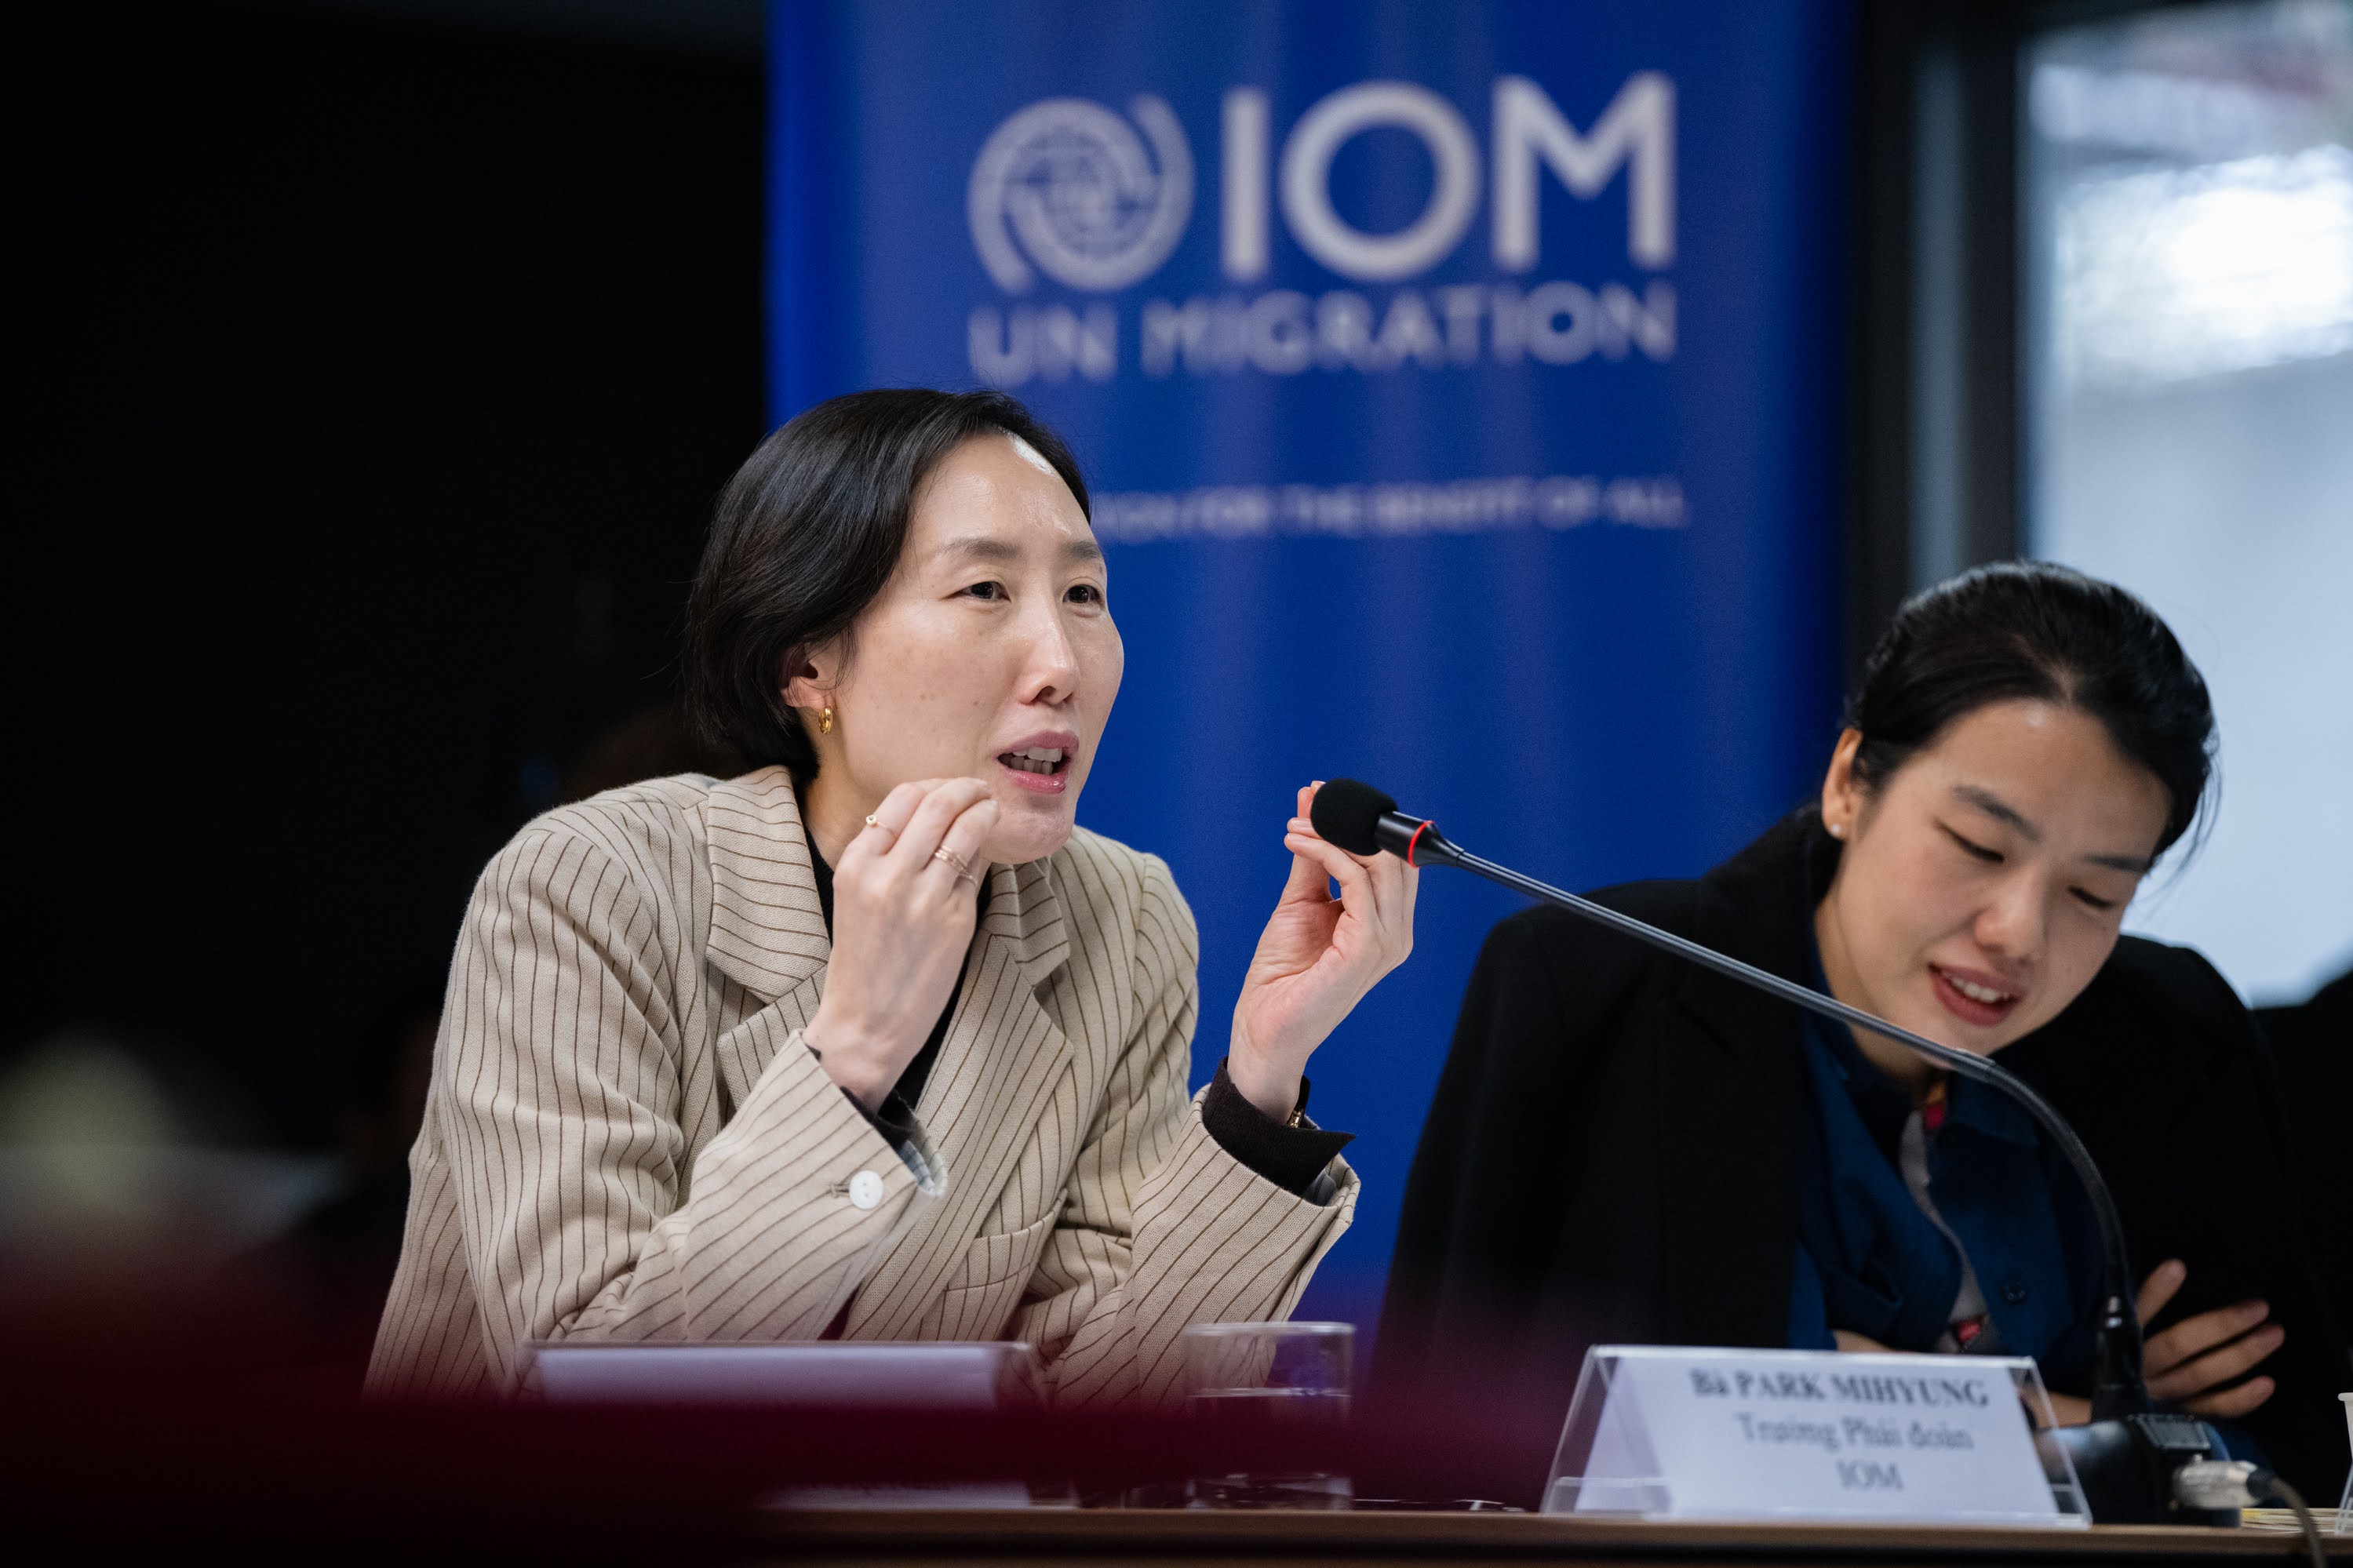 IOM’s Chief of Mission, Ms Park Mihyung gave her comments to the students